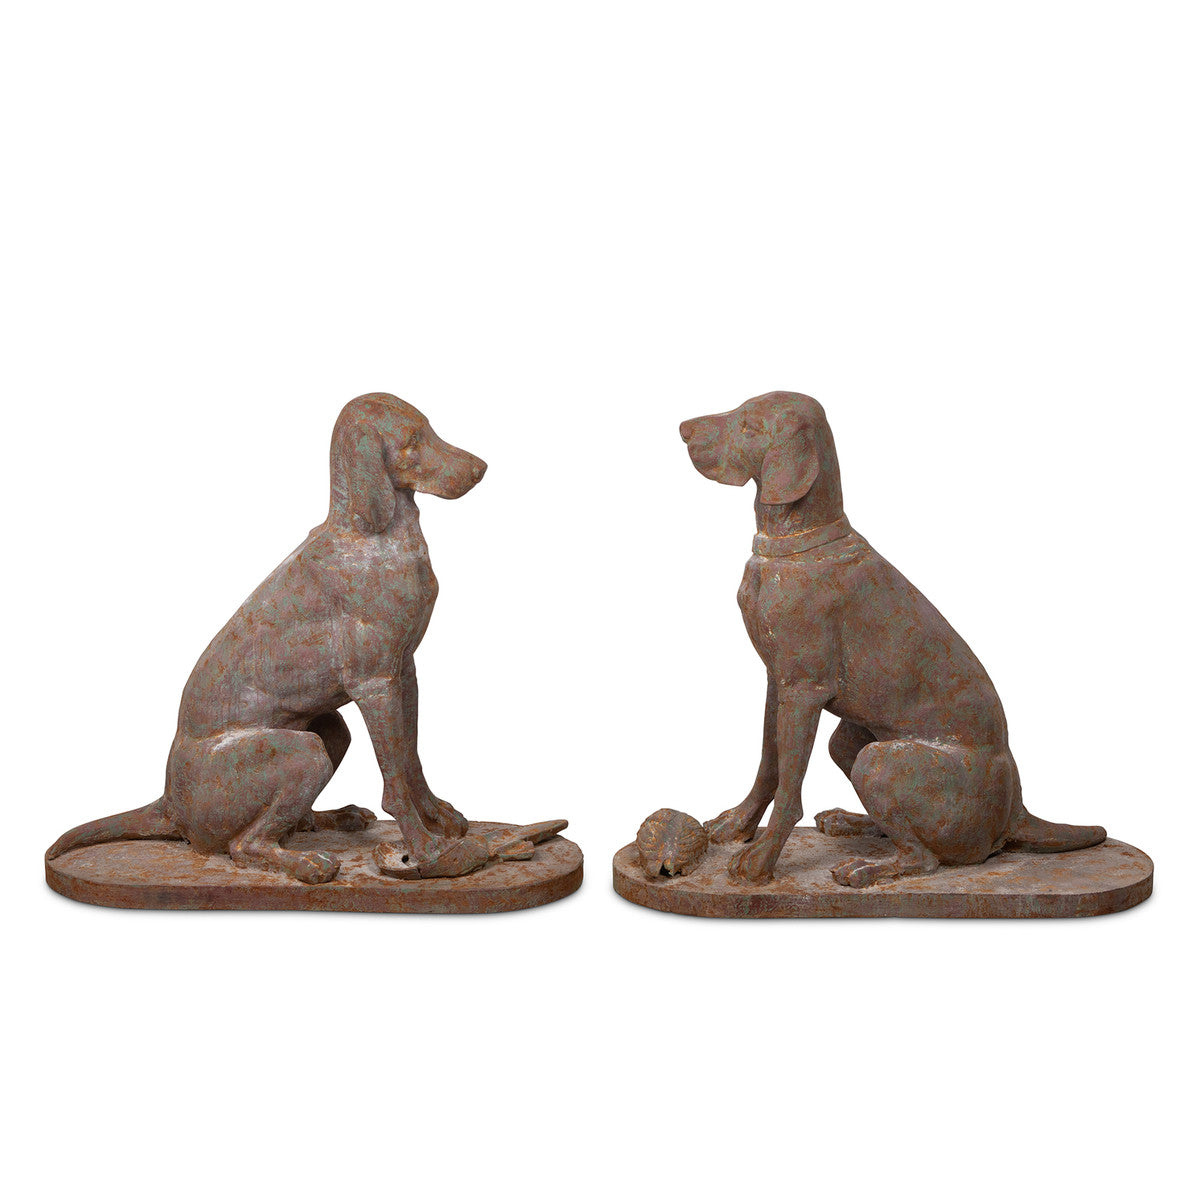 Estate iron Hound Statues for sale, Antique Iron Dog Statues for sale